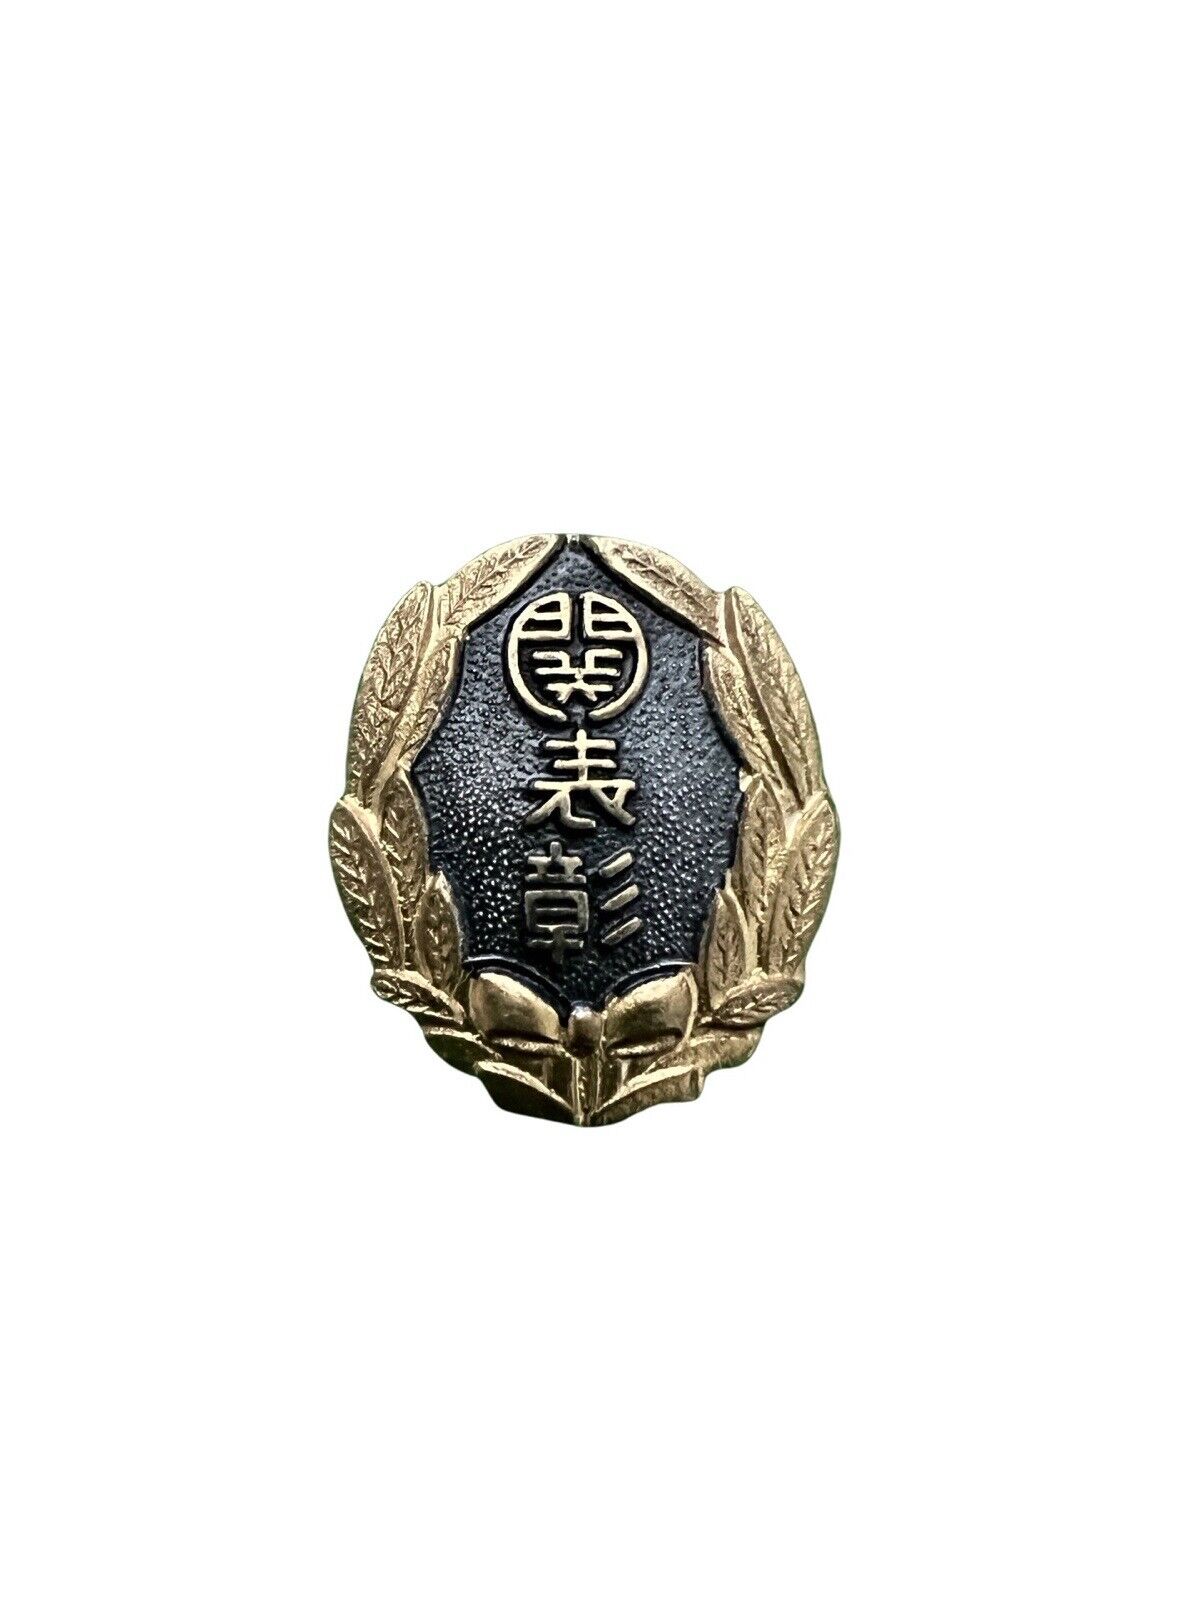 Vintage Japanese  Unknown Medal ? Military, Civilian, Religious